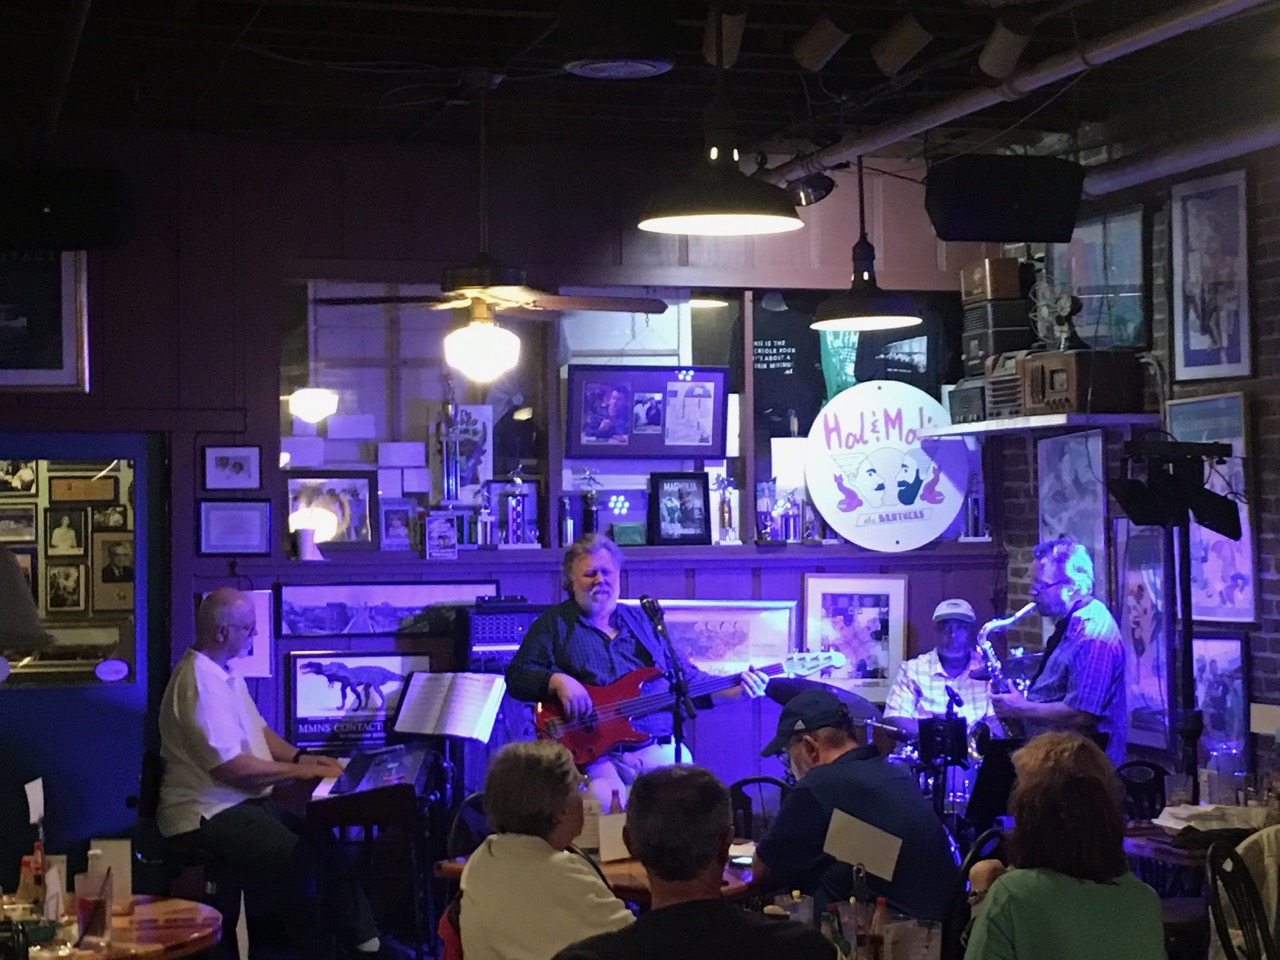 The band at Hal & Mal's in Jackson, Mississippi